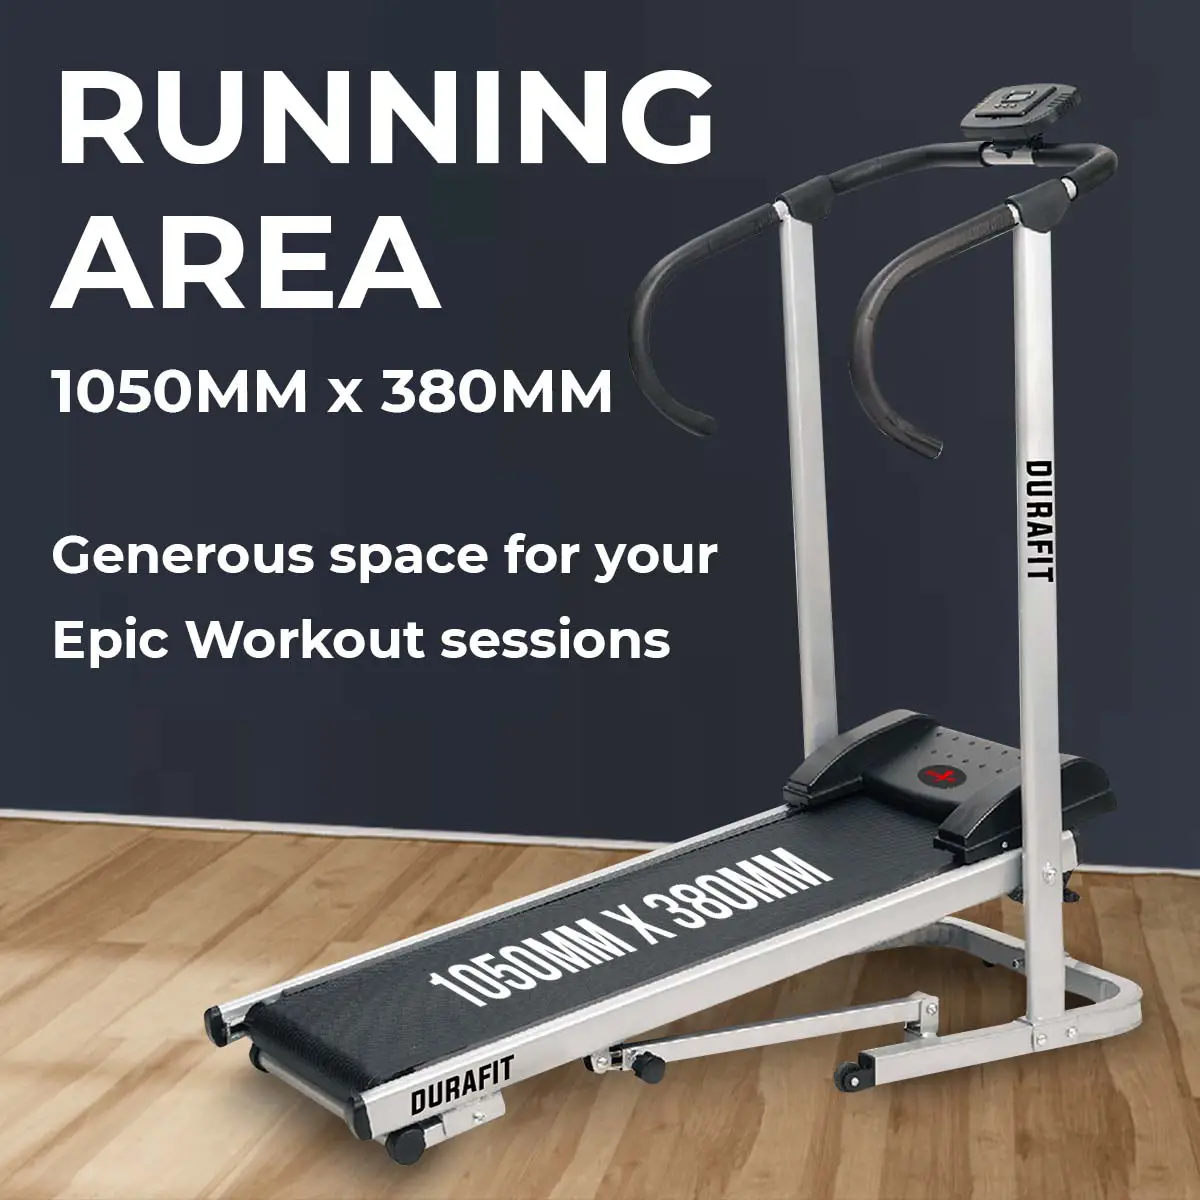 Durafit Manual Treadmill Hmt01 with larger running area